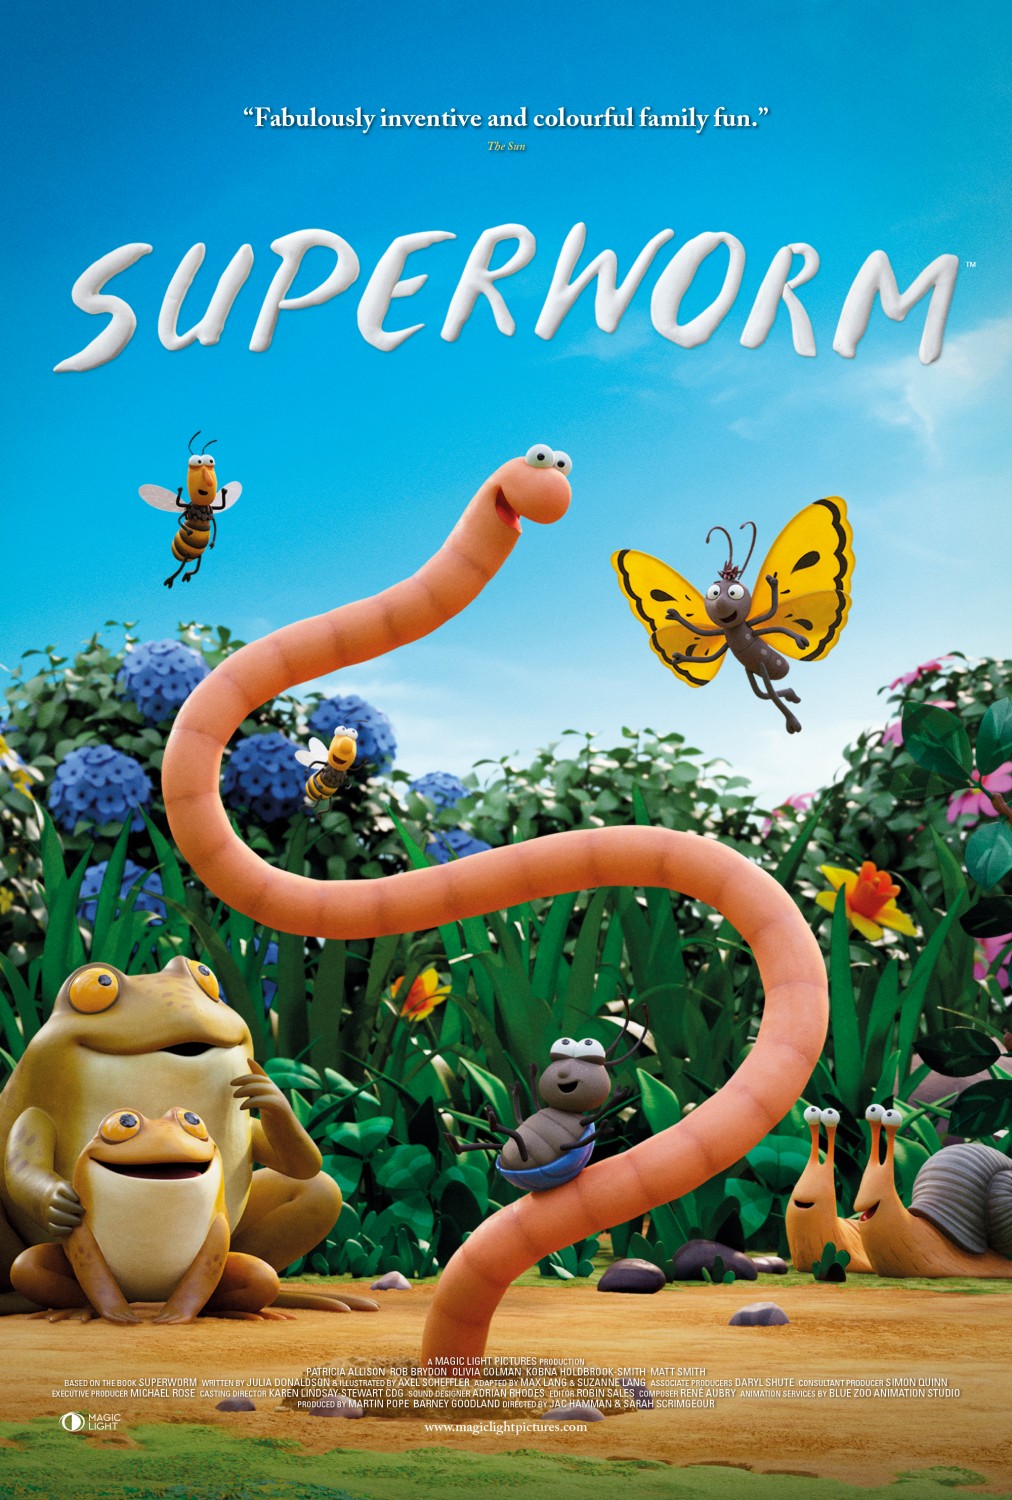 Extra Large Movie Poster Image for Superworm